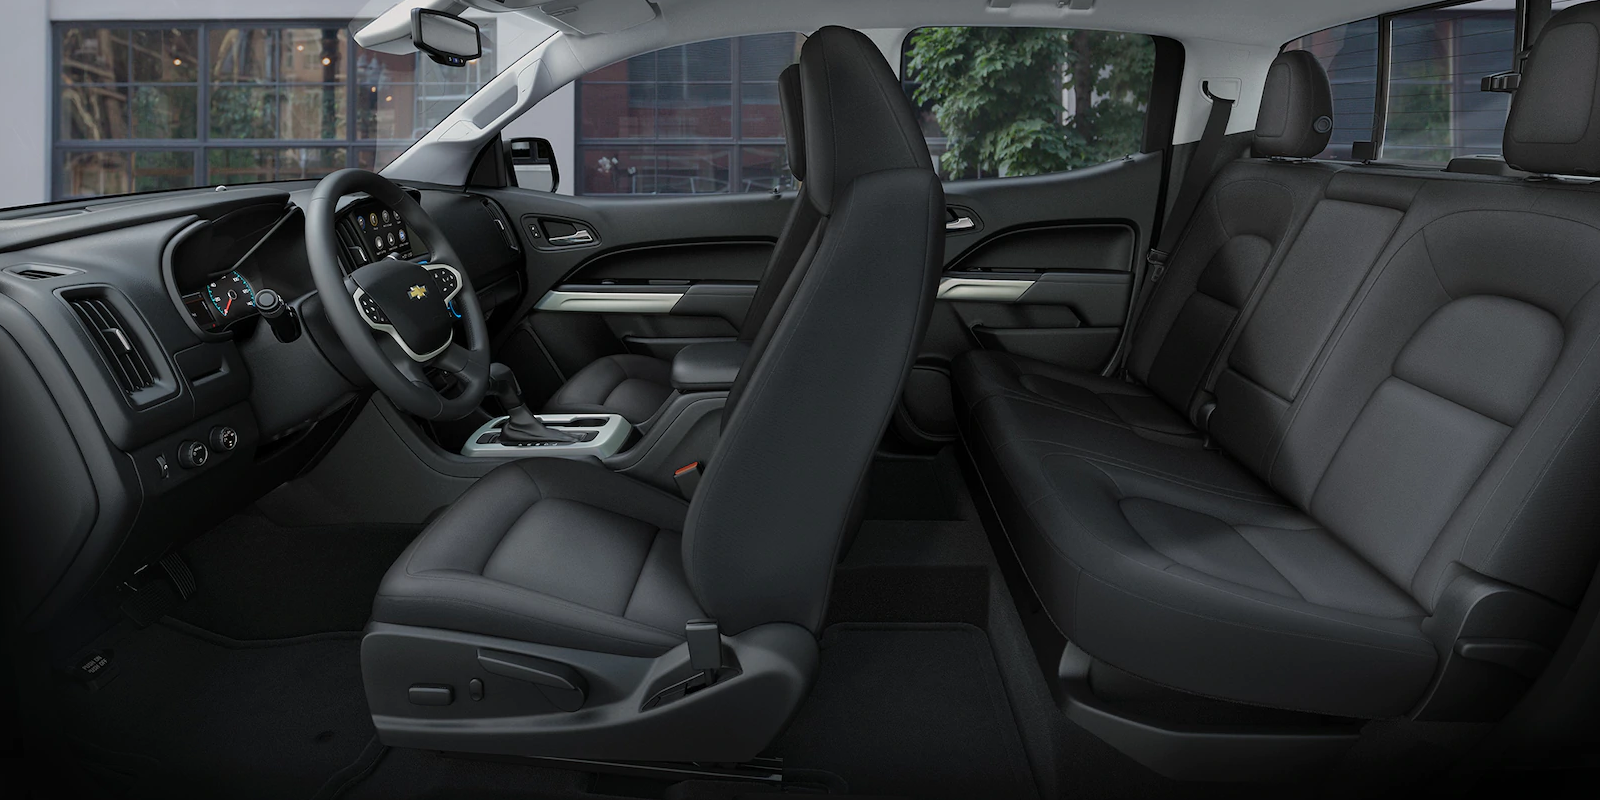 2019 Chevrolet Colorado Front Interior Picture.png